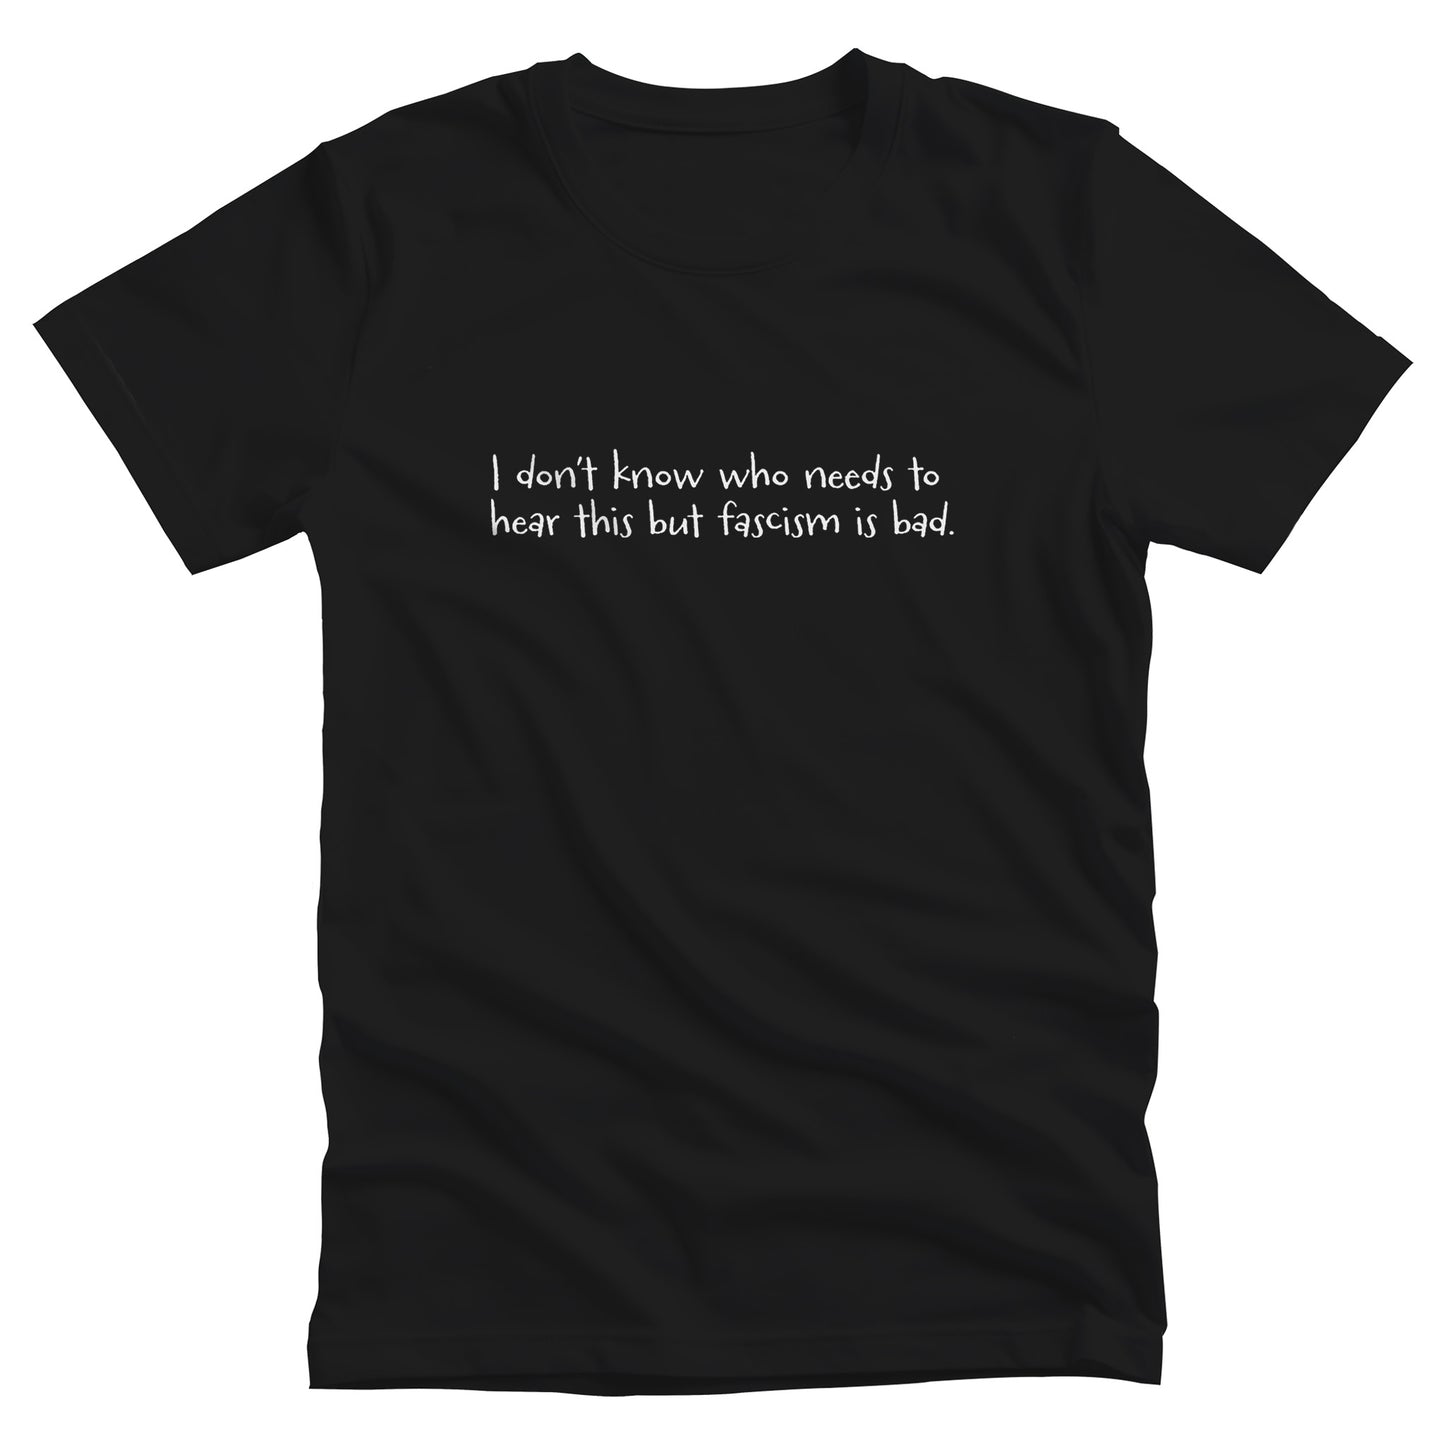 Black unisex t-shirt that reads in a hand-written font, “I don’t know who needs to hear this but fascism is bad.” It takes up two lines.